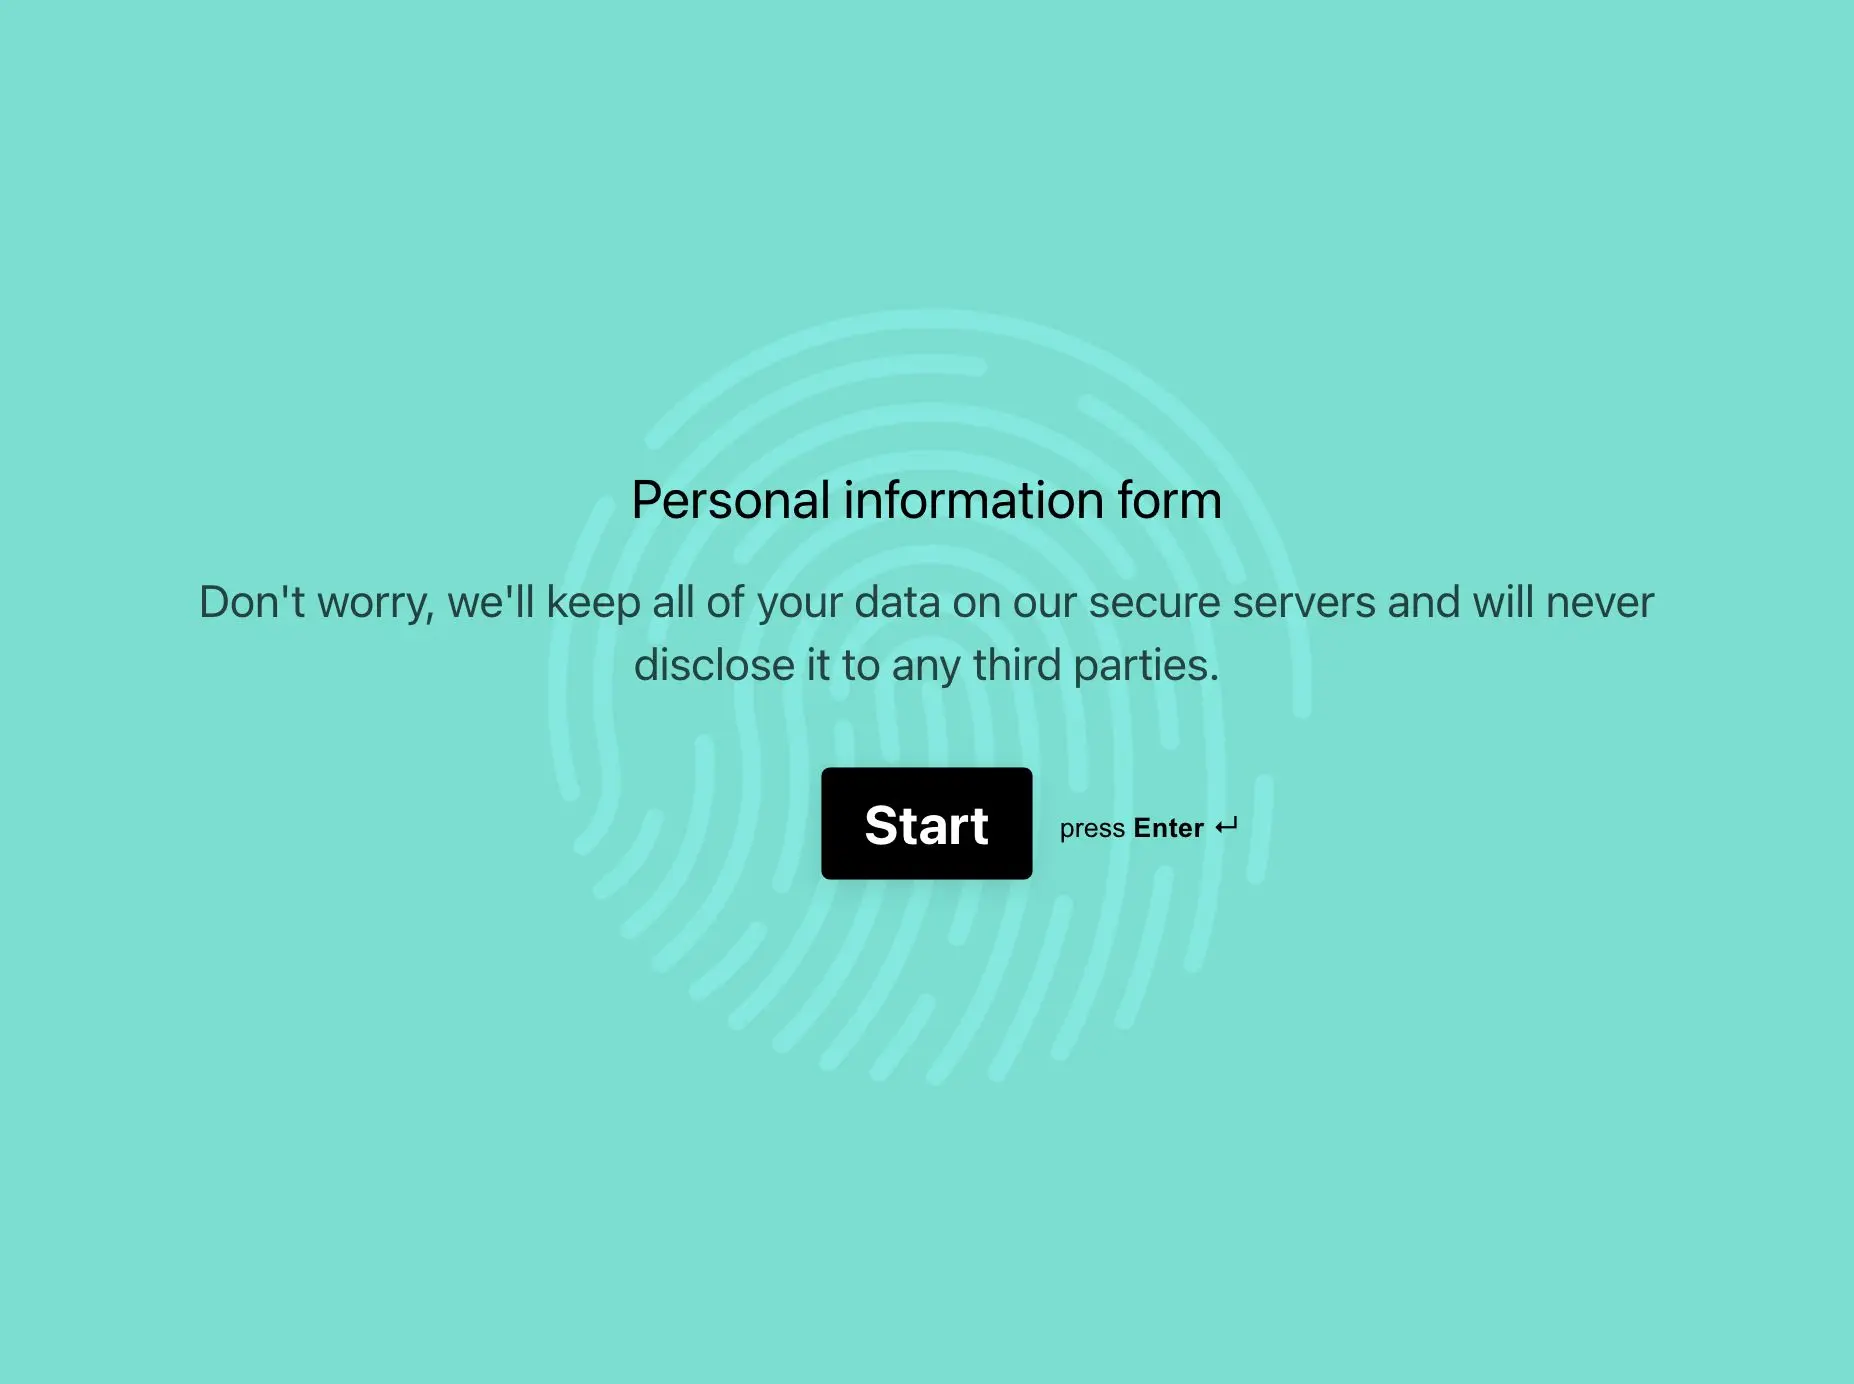 Personal Information Form Template Hero